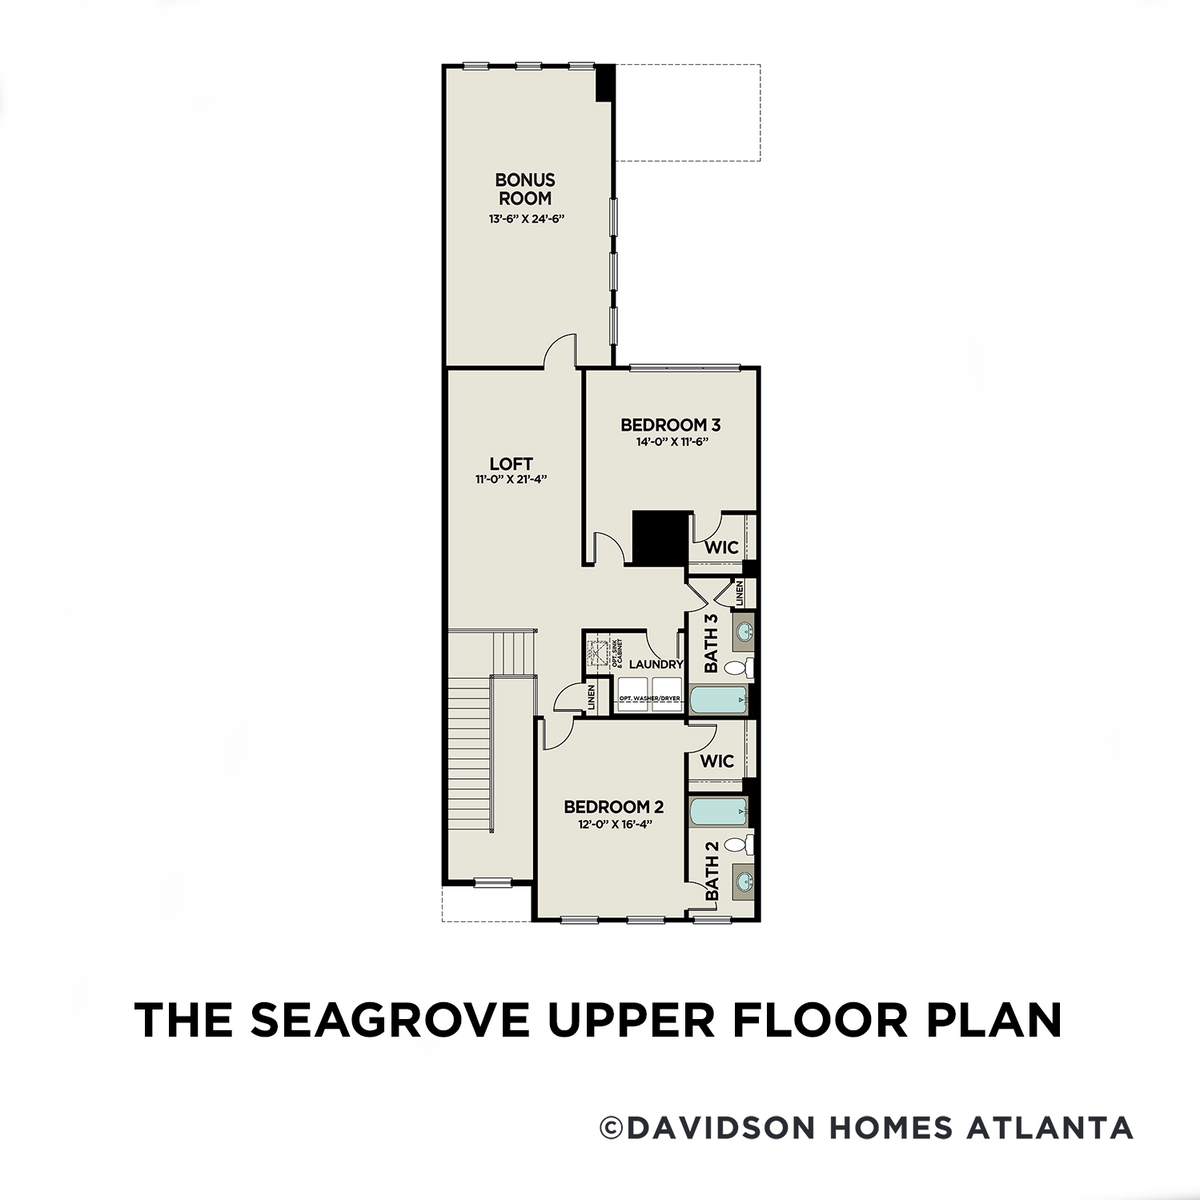 2 - The Seagrove B floor plan layout for 748 Stickley Oak Way in Davidson Homes' The Village at Towne Lake community.